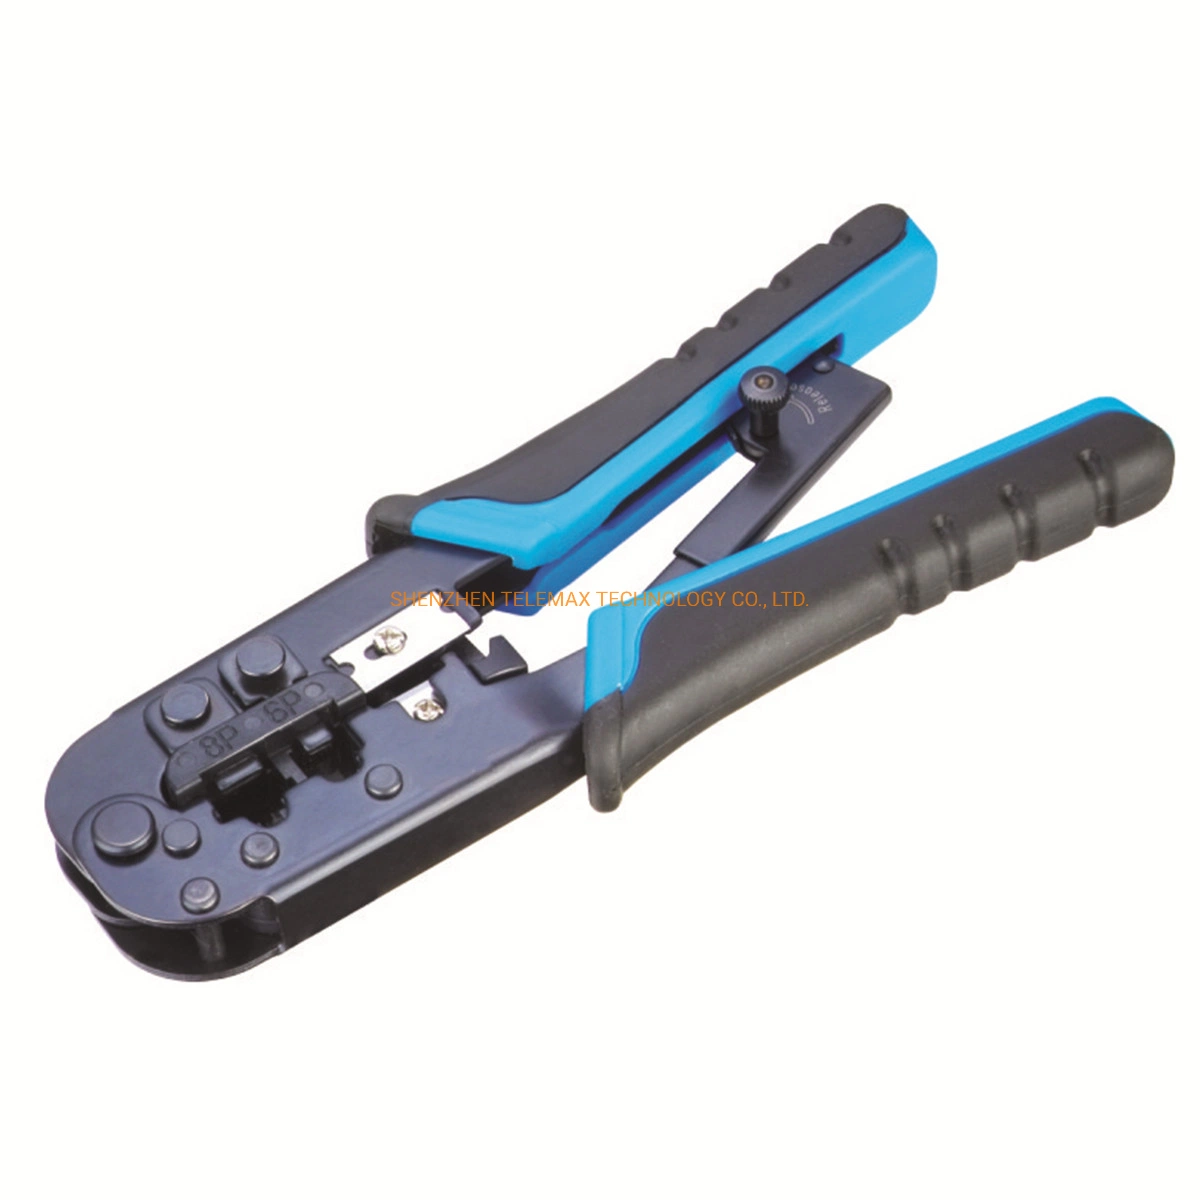 Crimping Tool Supports 8p8c/RJ45 6p6c/Rj12, 6p4c/Rj11...with Small Cable Stripper